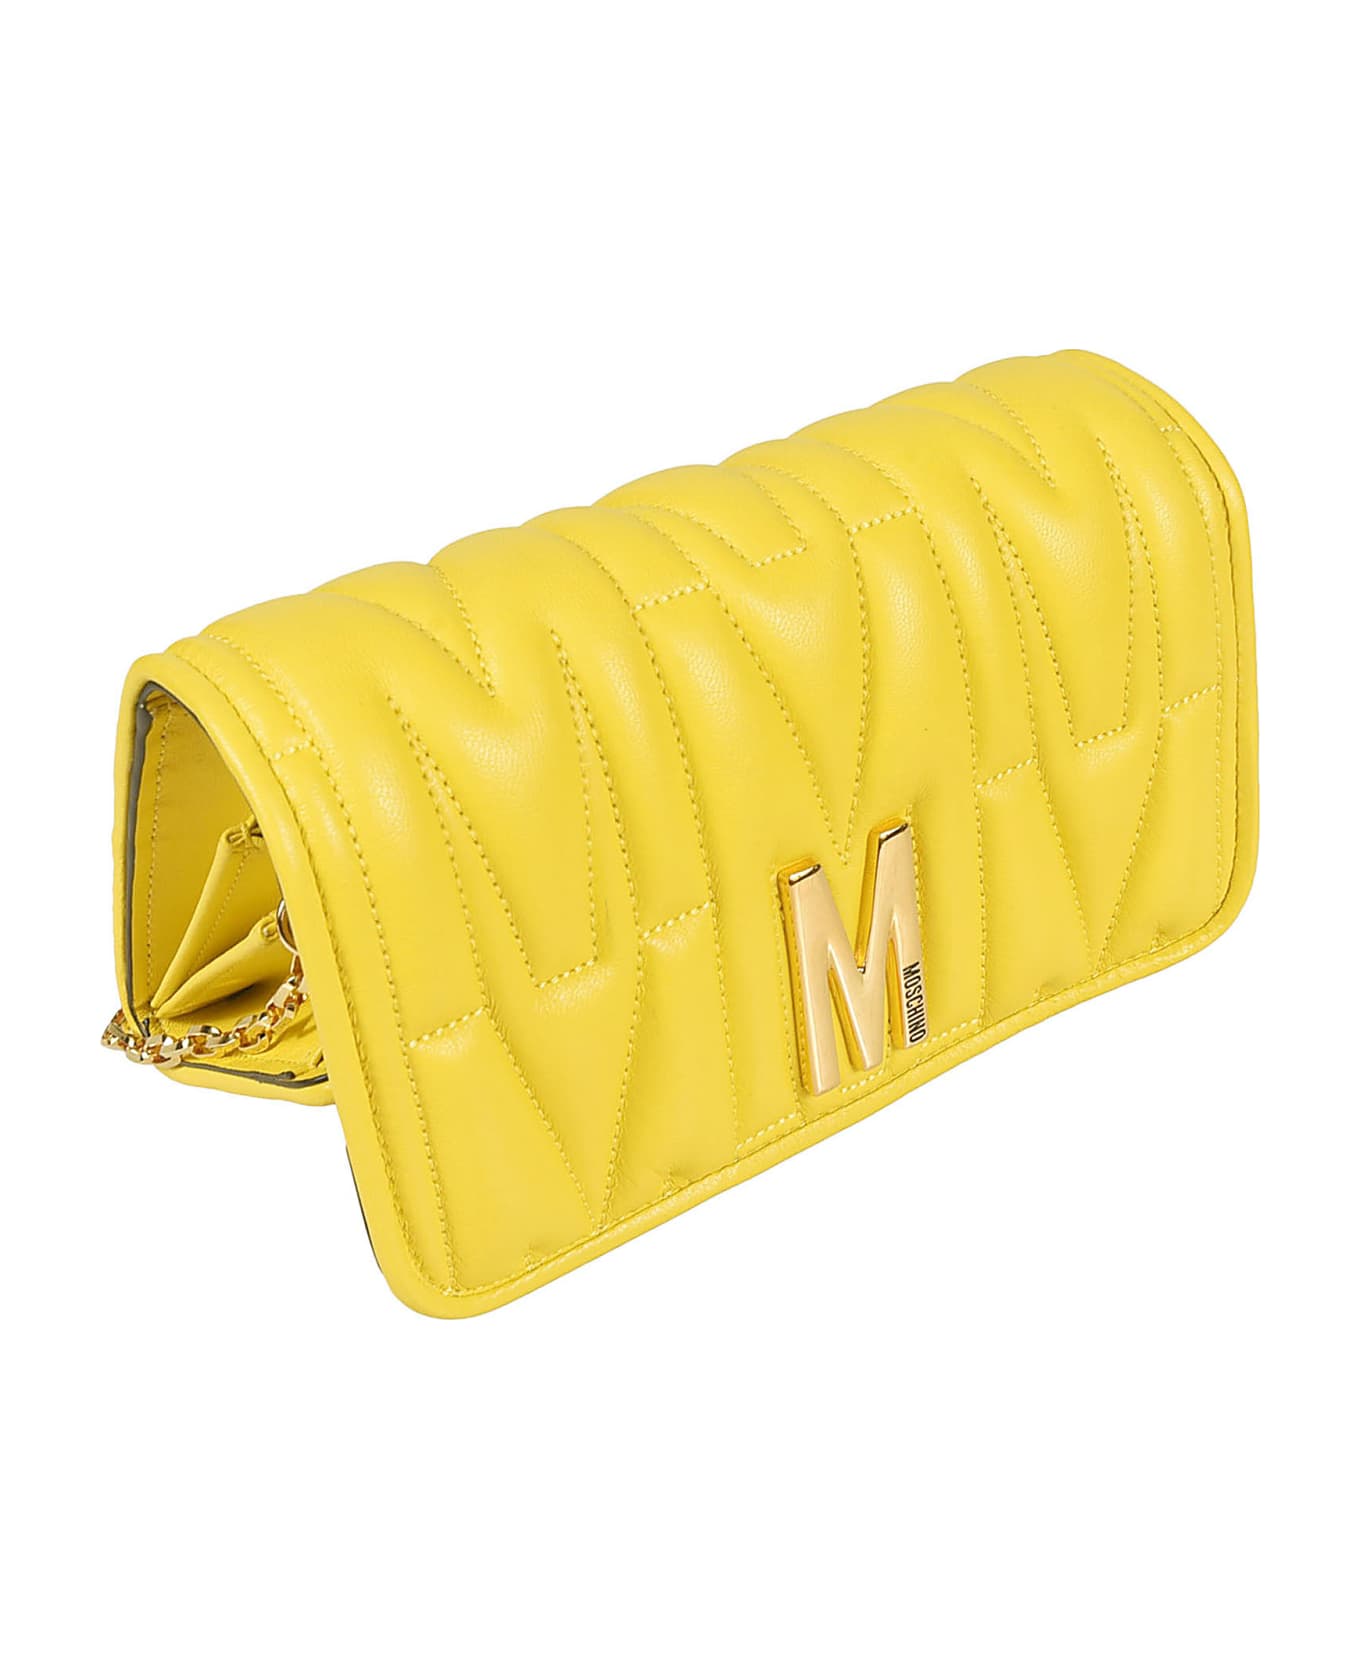 Moschino M Plaque Quilted Flap Chain Shoulder Bag - 0027